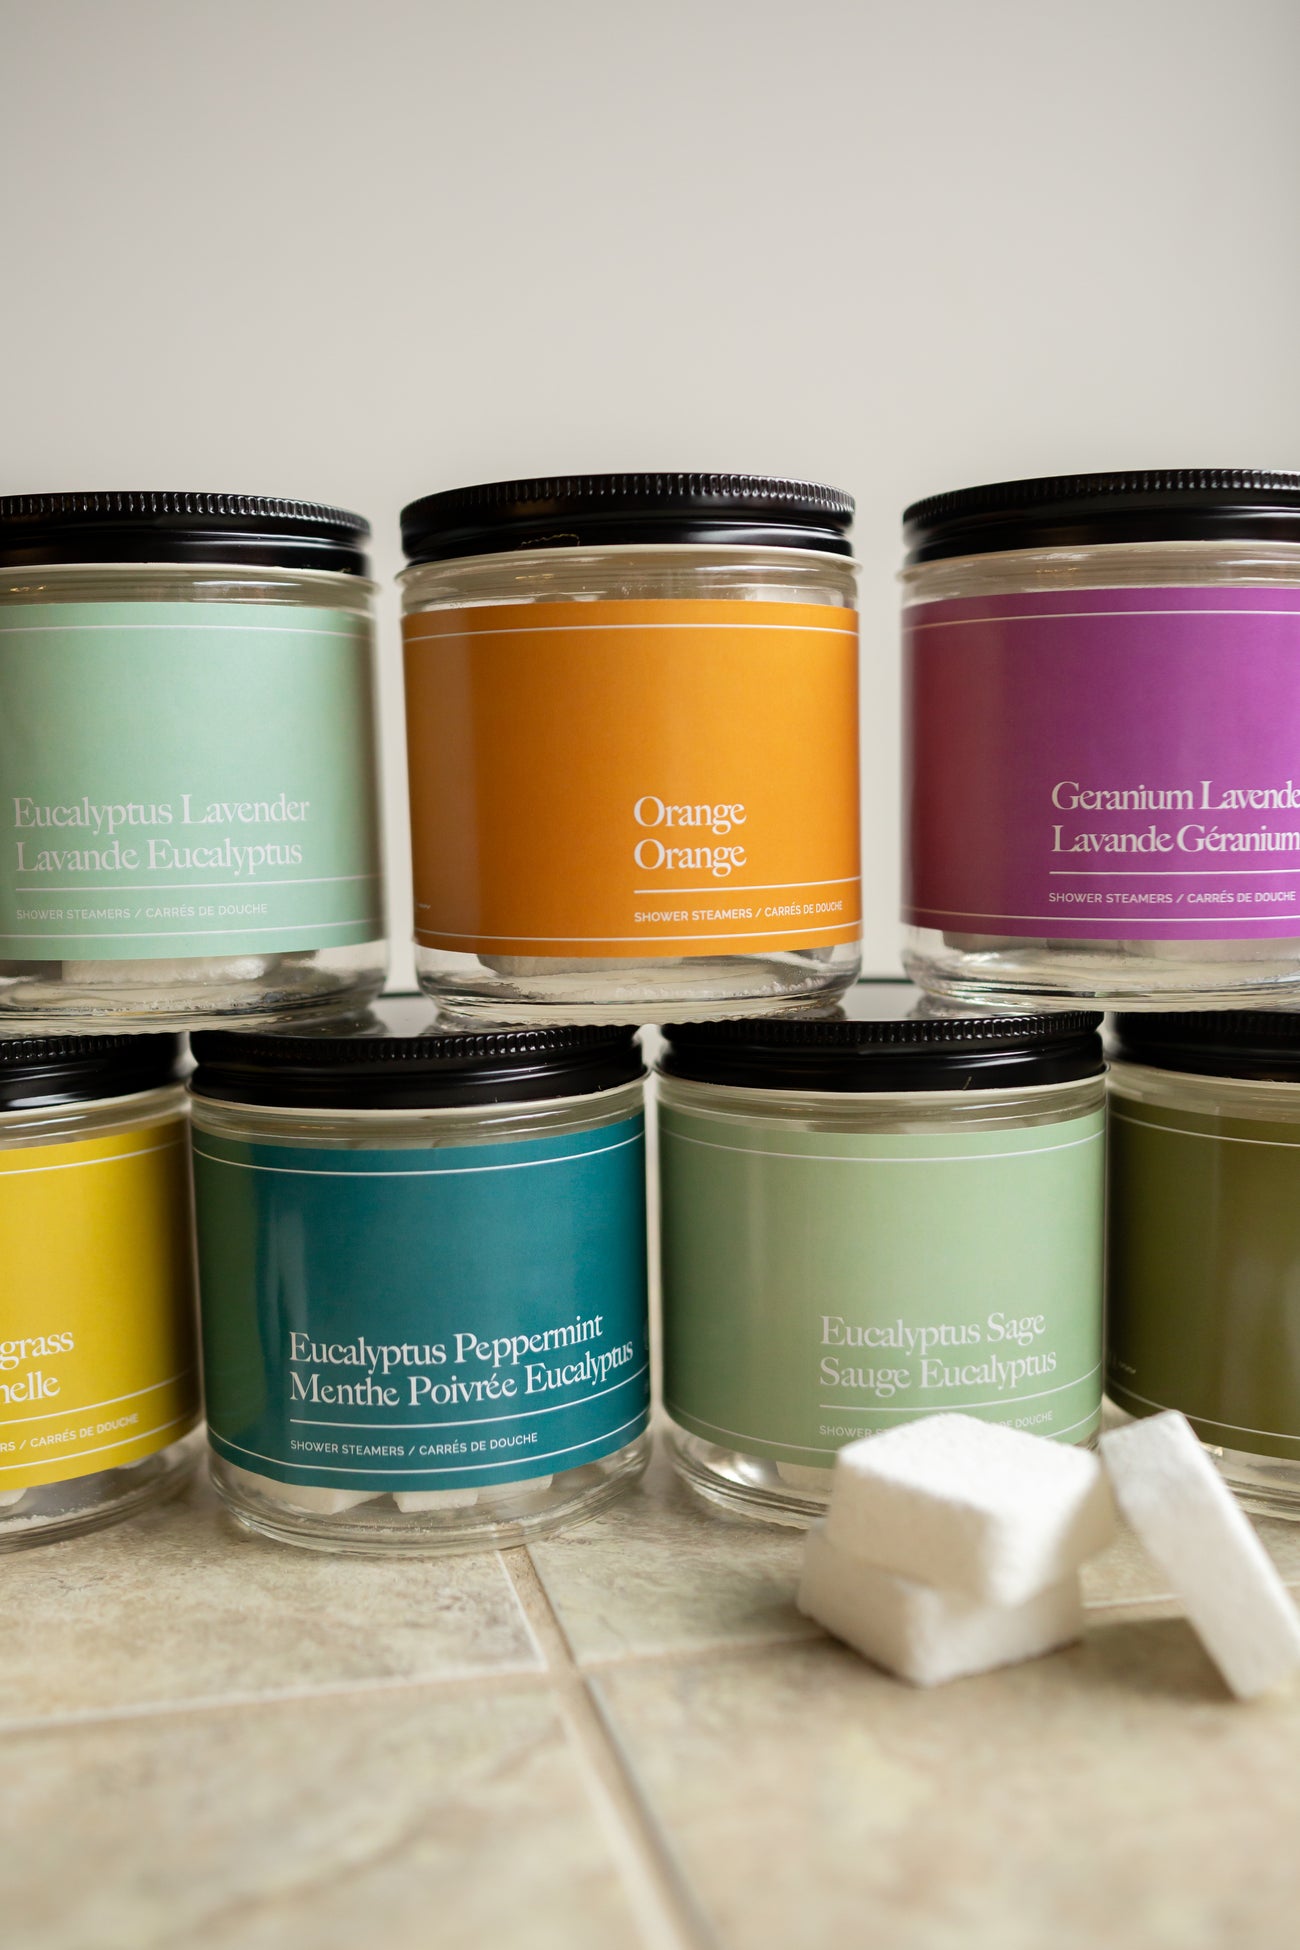 Colourful jars displaying packaging for showers steamers.